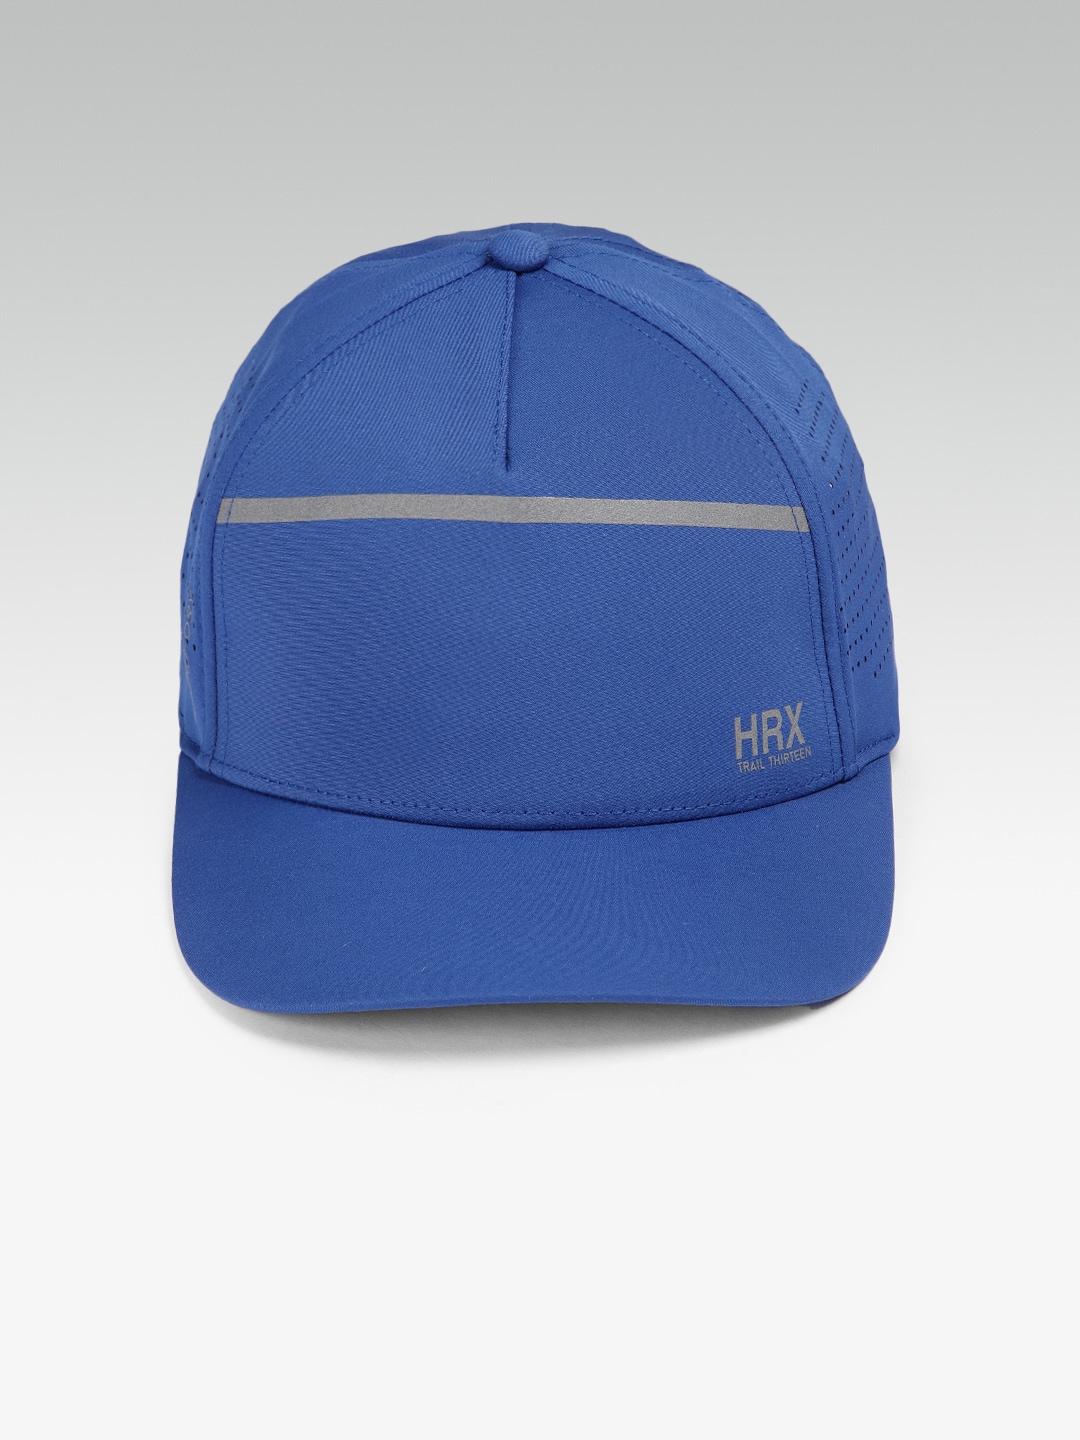 HRX by Hrithik Roshan Unisex Blue Solid Training Cap Price in India